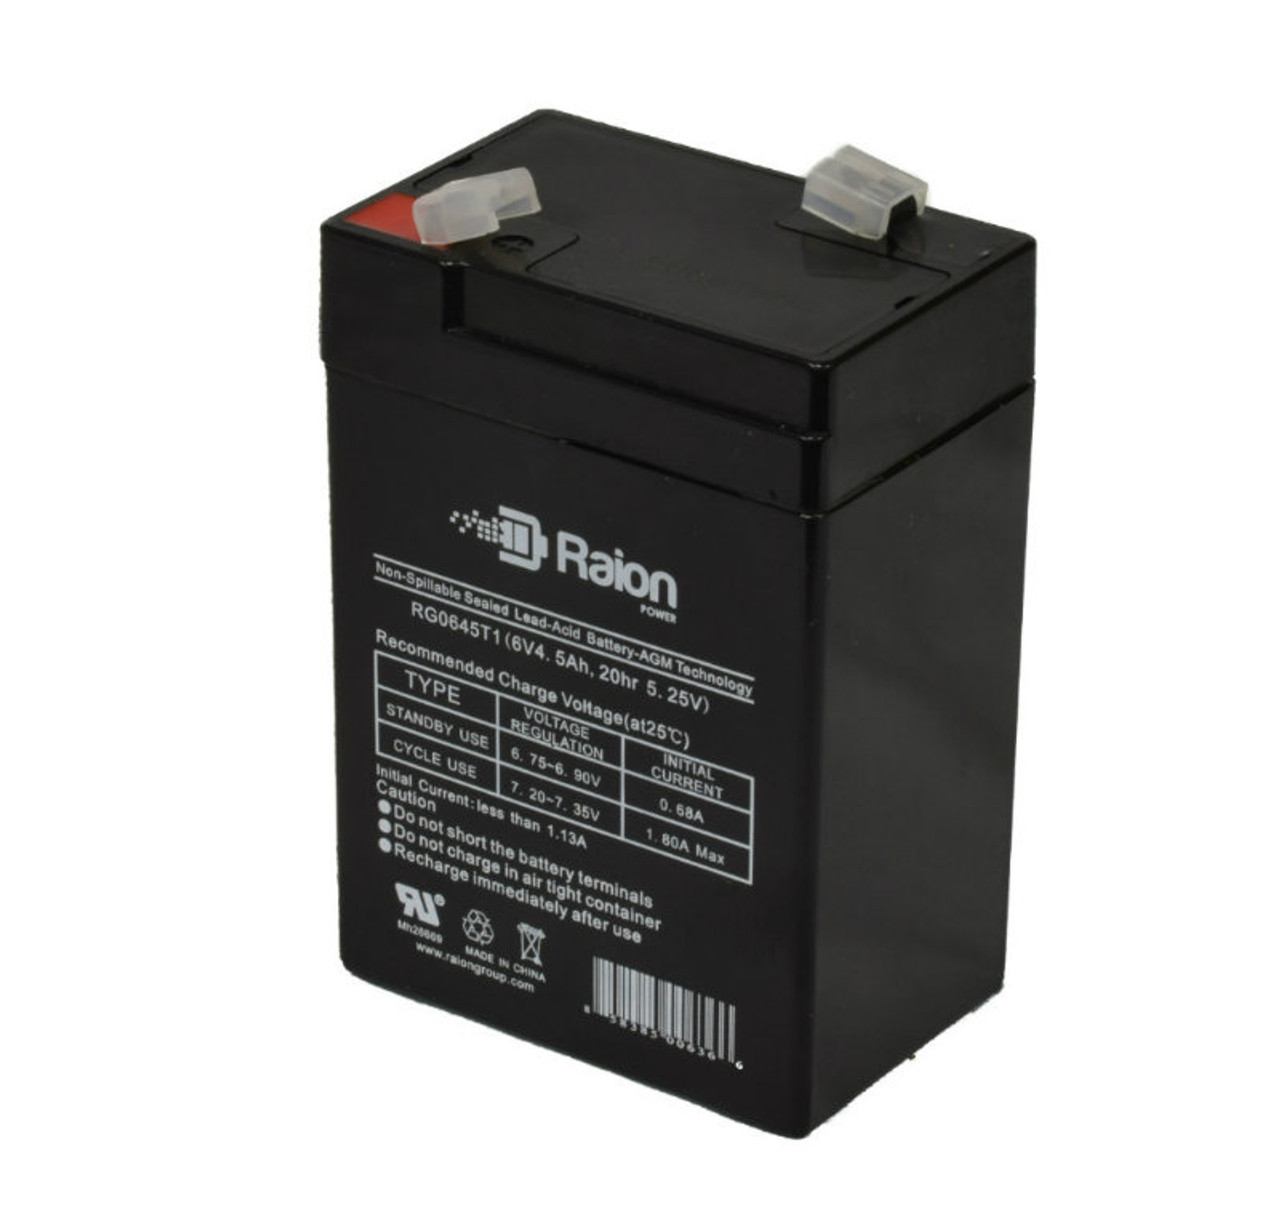 Raion Power RG0645T1 6V 4.5Ah Replacement Ride-On Toy Battery for TOBBI 12V Bentley Electric Kids Ride On Racer Car Toy